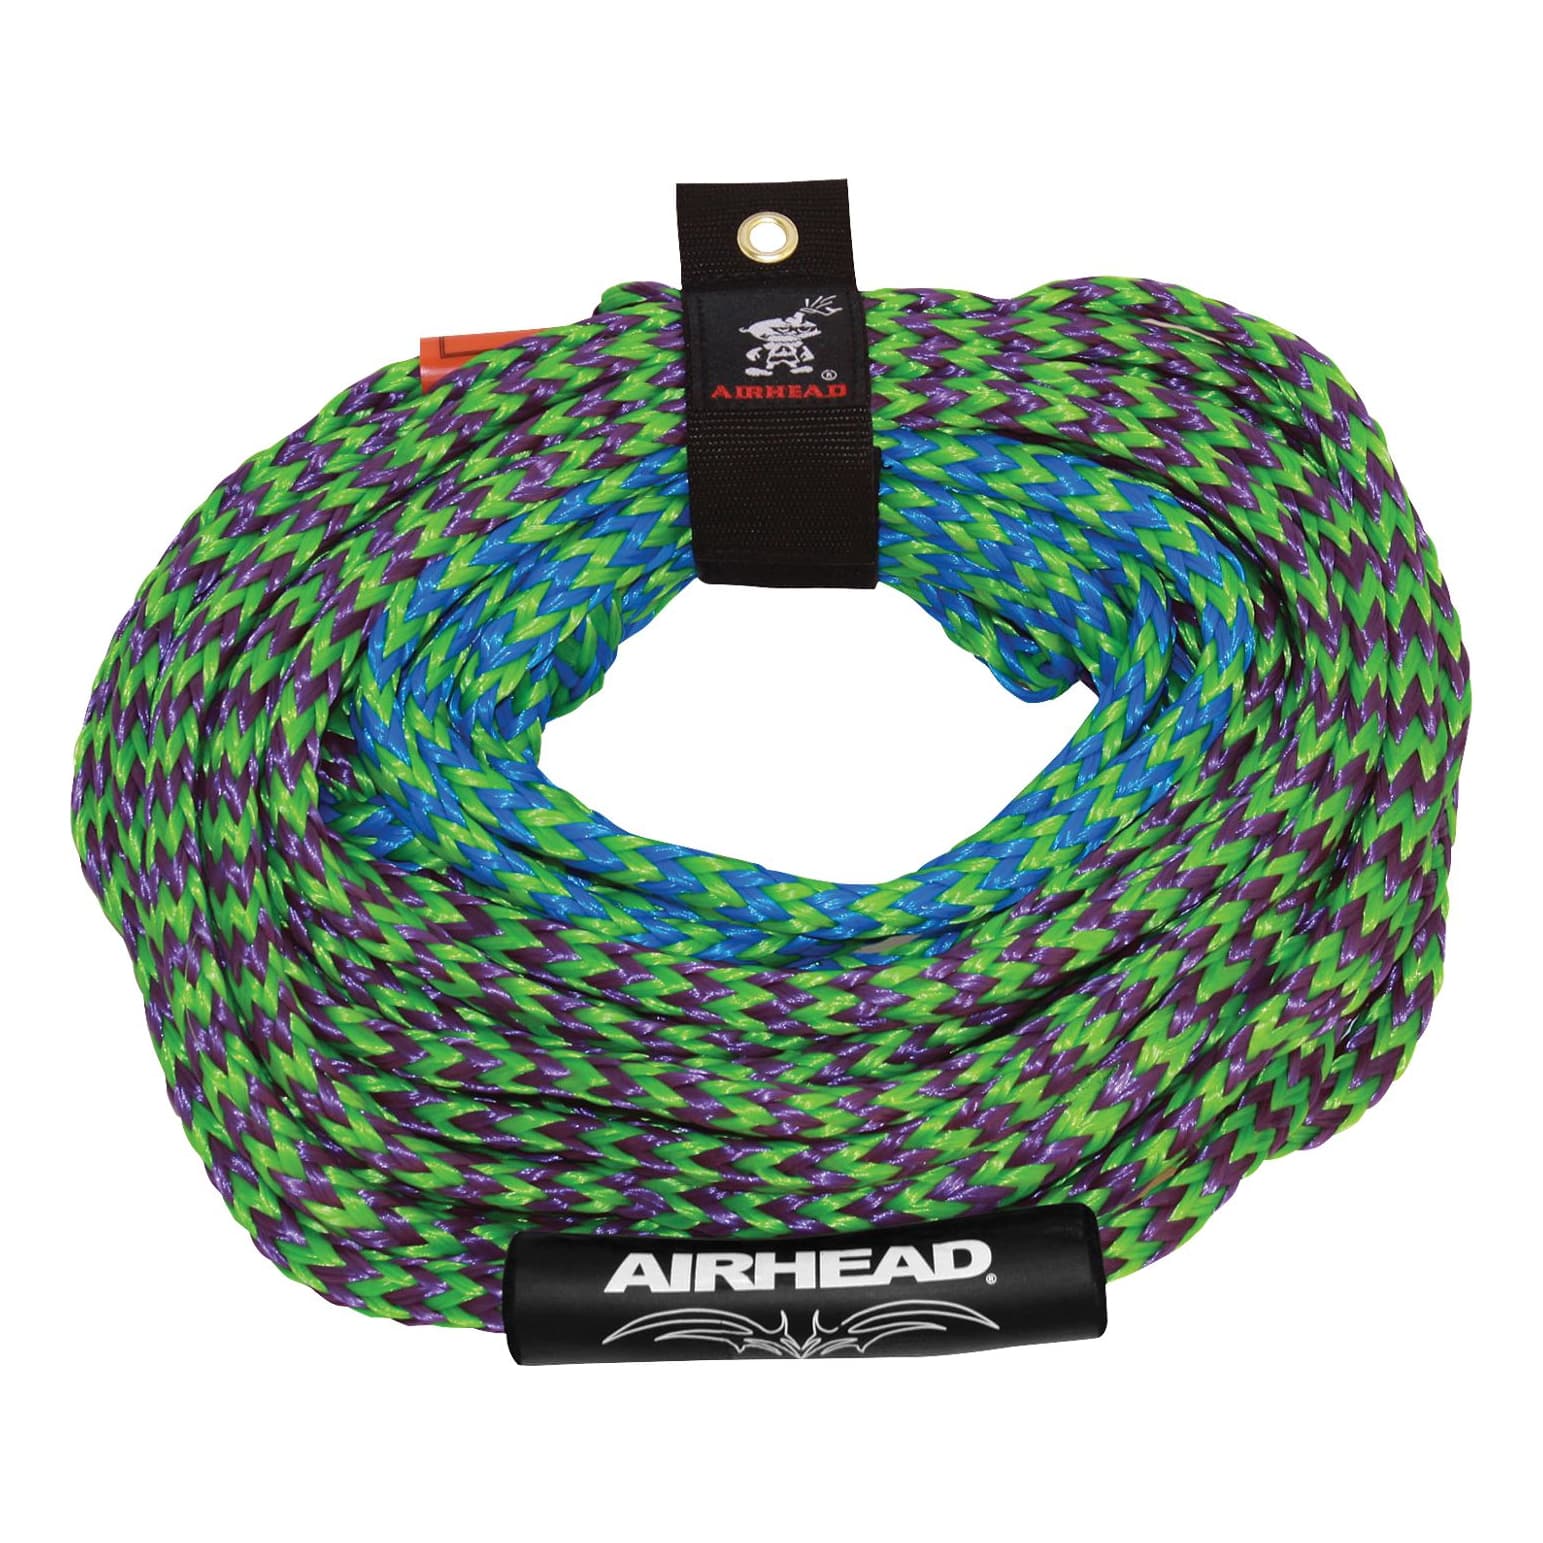 Airhead 2-Section 4-Rider Tow Rope - AHTR-42